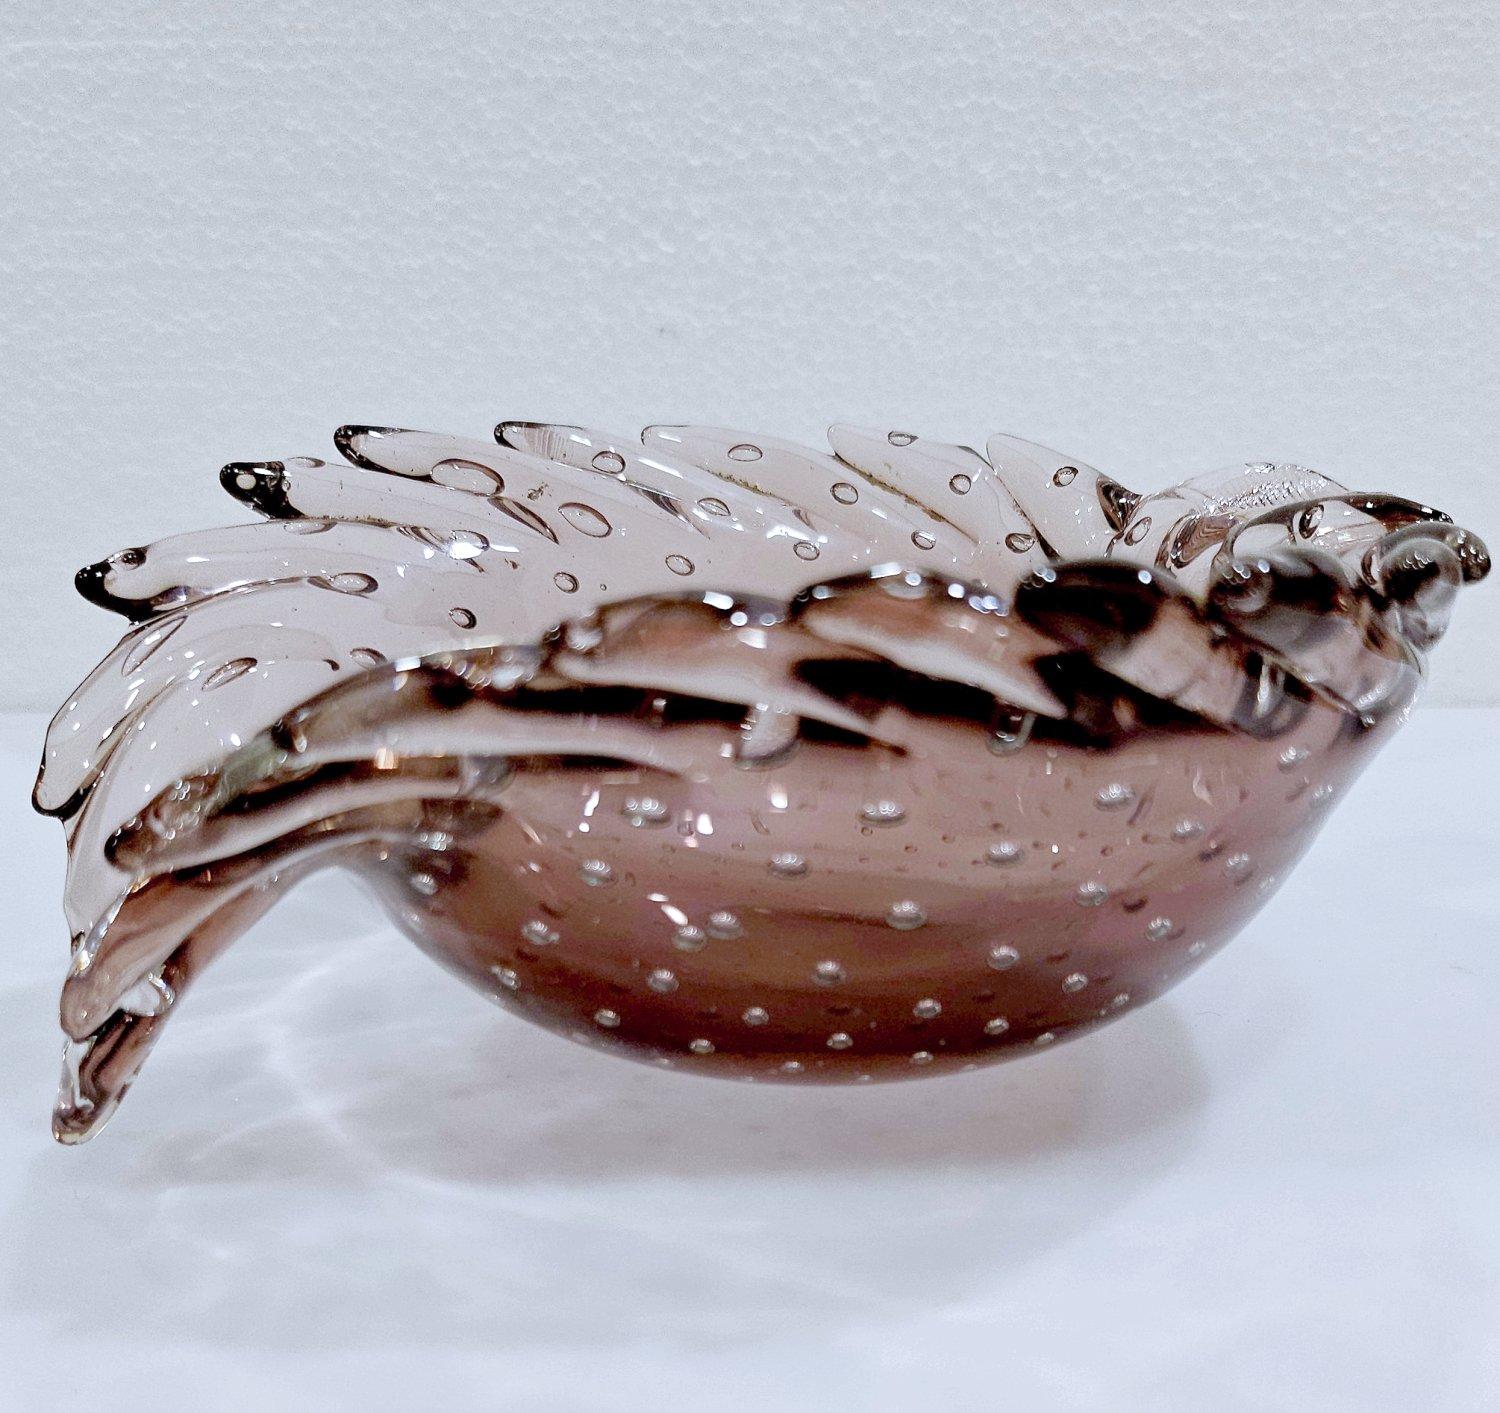 Vintage Murano Glass Sculptural Leaf Bowl, Bullicante (controlled bubble) Glass
This is a uniquely shapely bowl. It is designed to represent a short-stemmed leaf with a waterfalling-type termination. Flowing, lovely design.
Measures: approximately 7